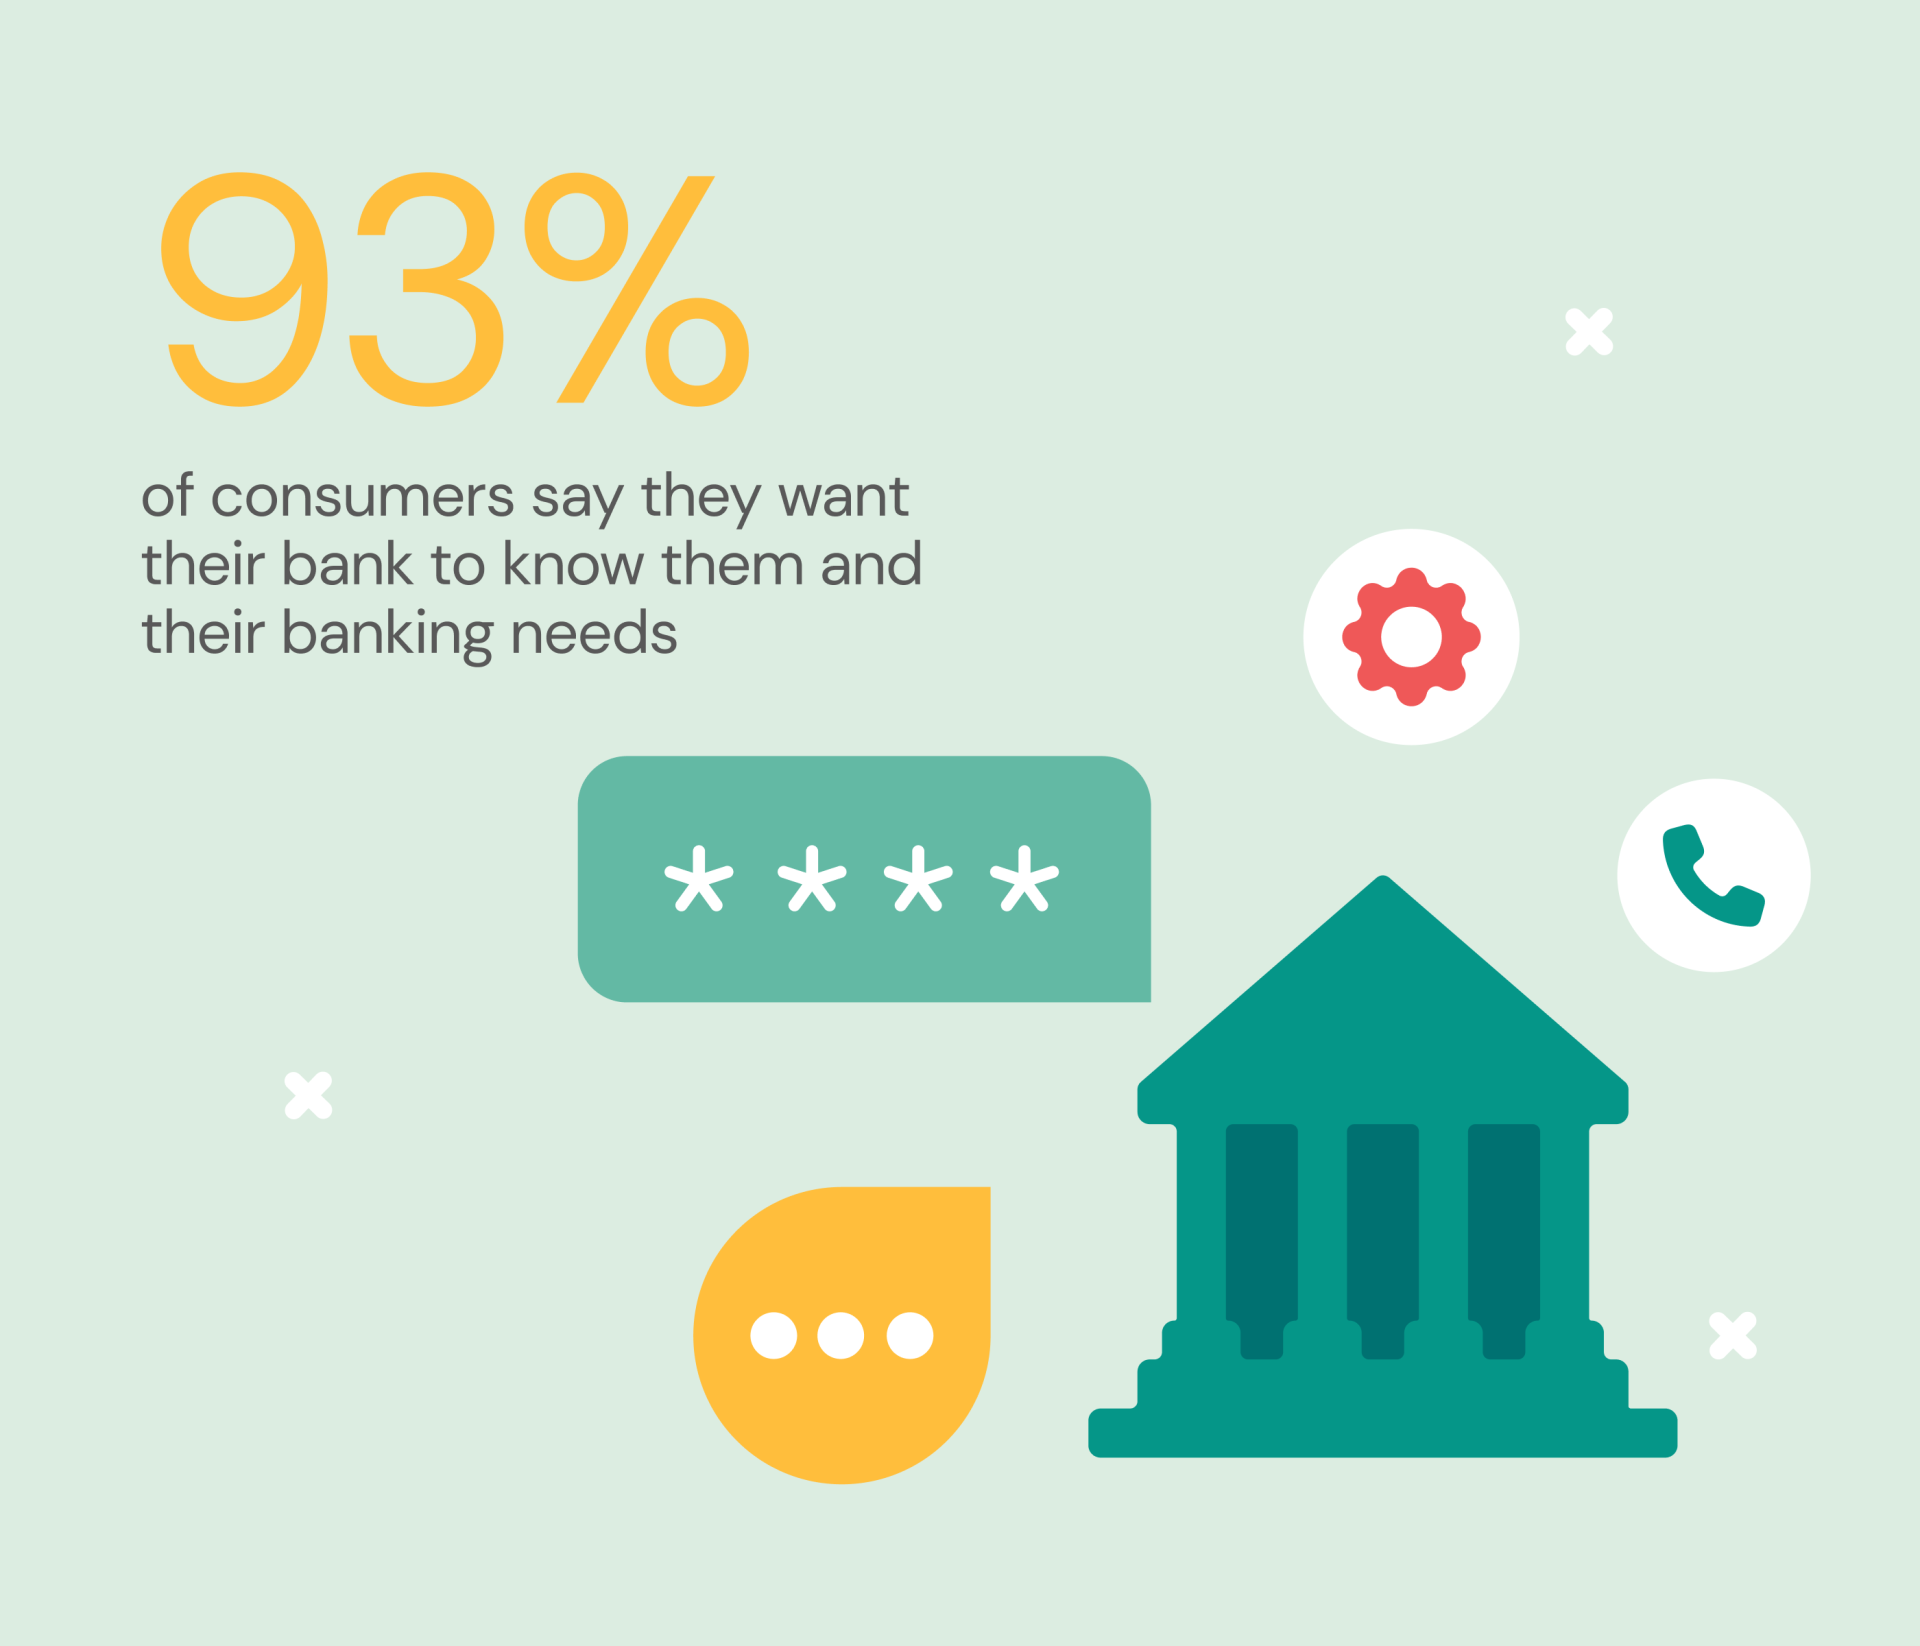 banking statistic: 93% of consumers want their bank to know their needs